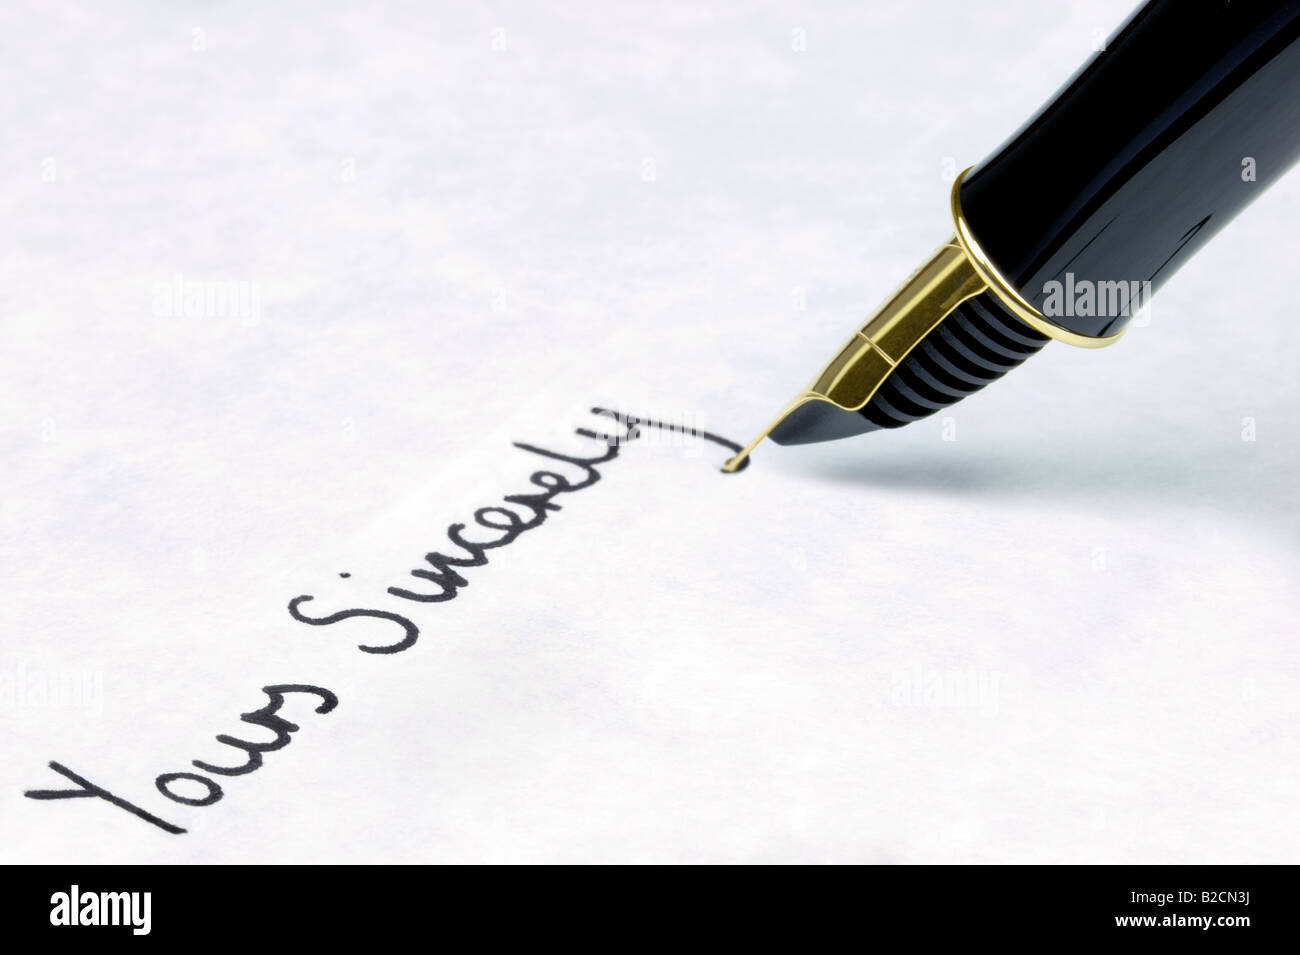 Yours Sincerely written on watermarked textured paper using a gold nibbed fountain pen Focal point is on the text Stock Photo